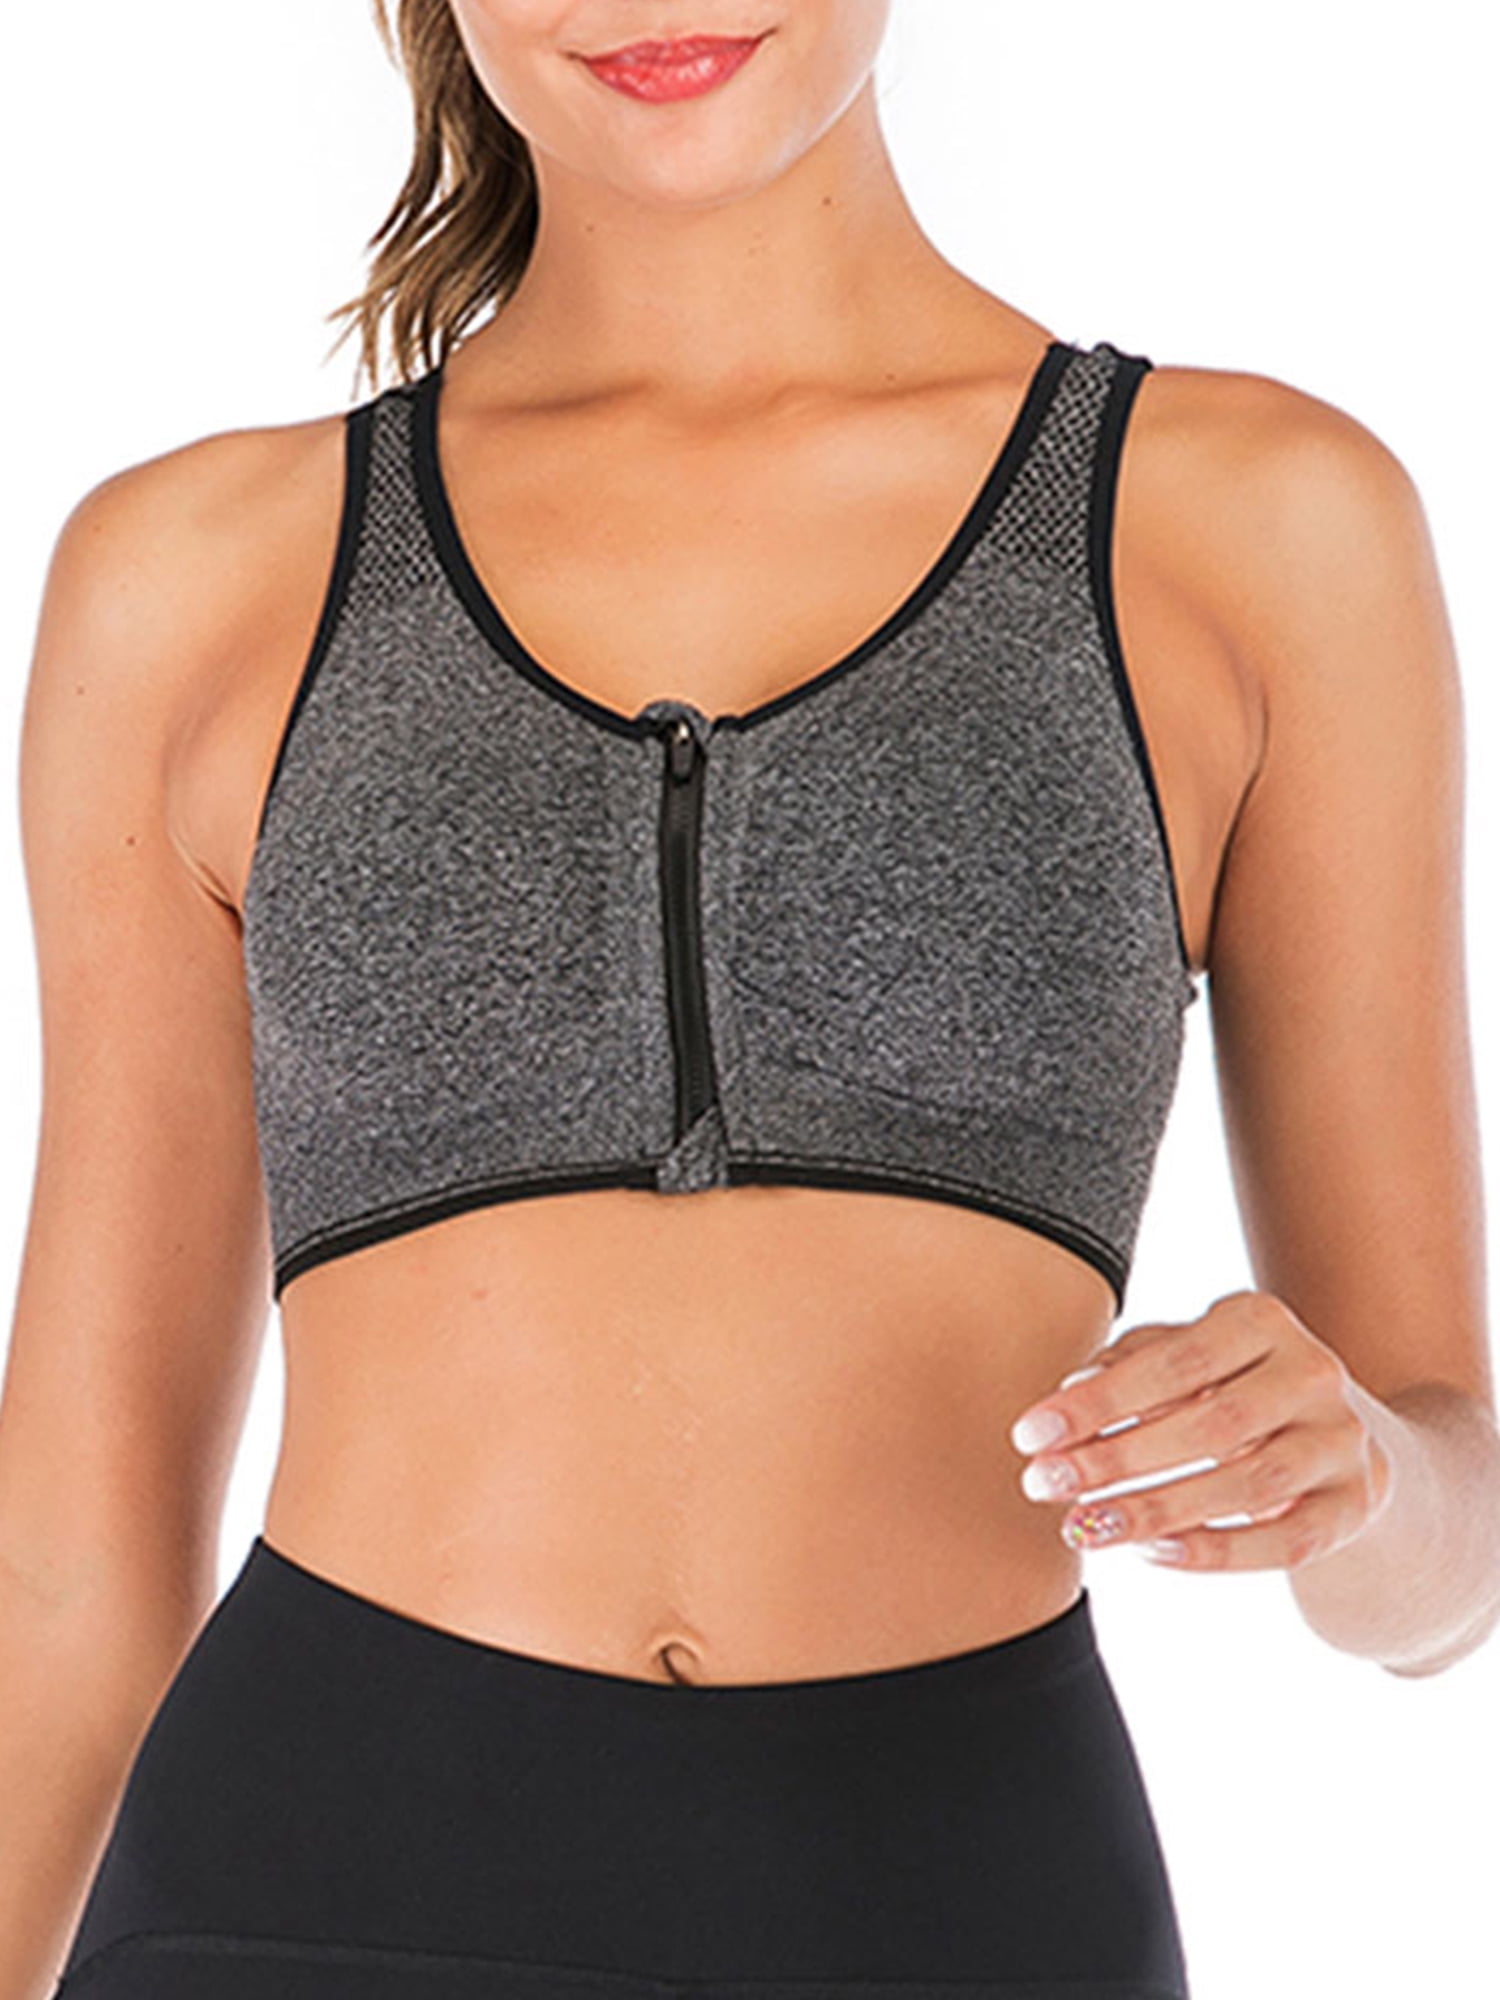 Racerback Sports Bras for Women Seamless Comfortable Medium Support Sports  Yoga Bra with Removable Pads Going Out